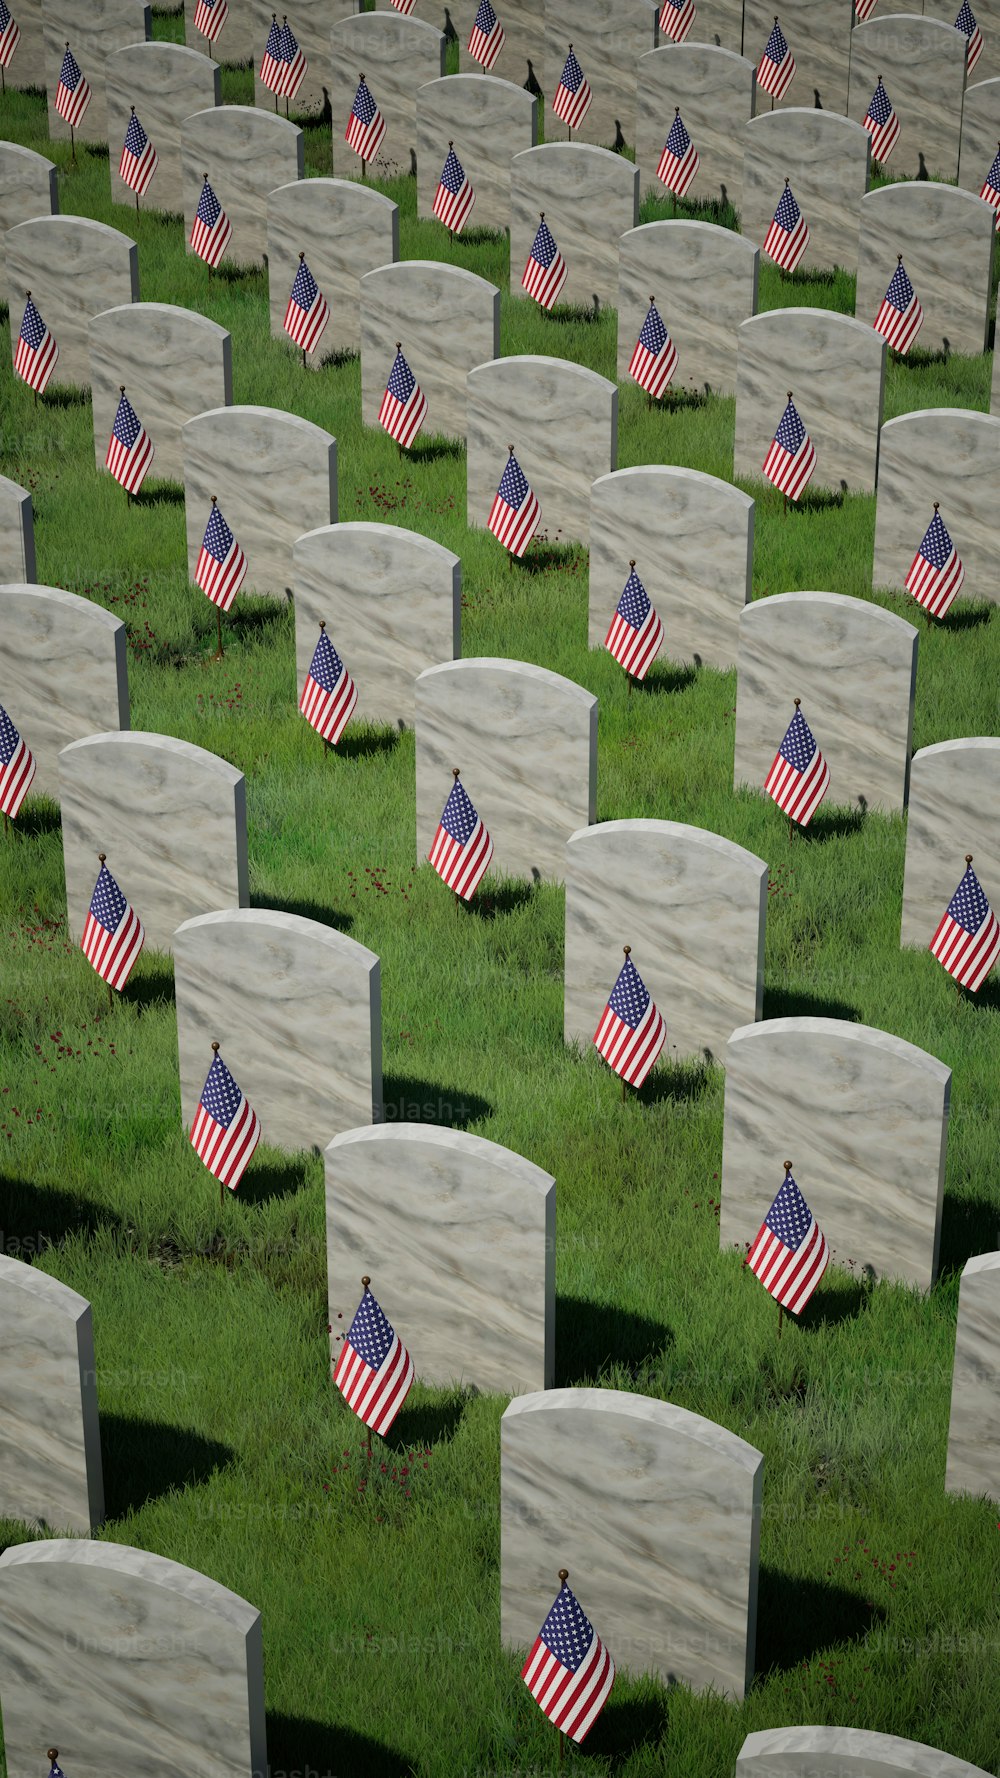 a field full of headstones with american flags on them